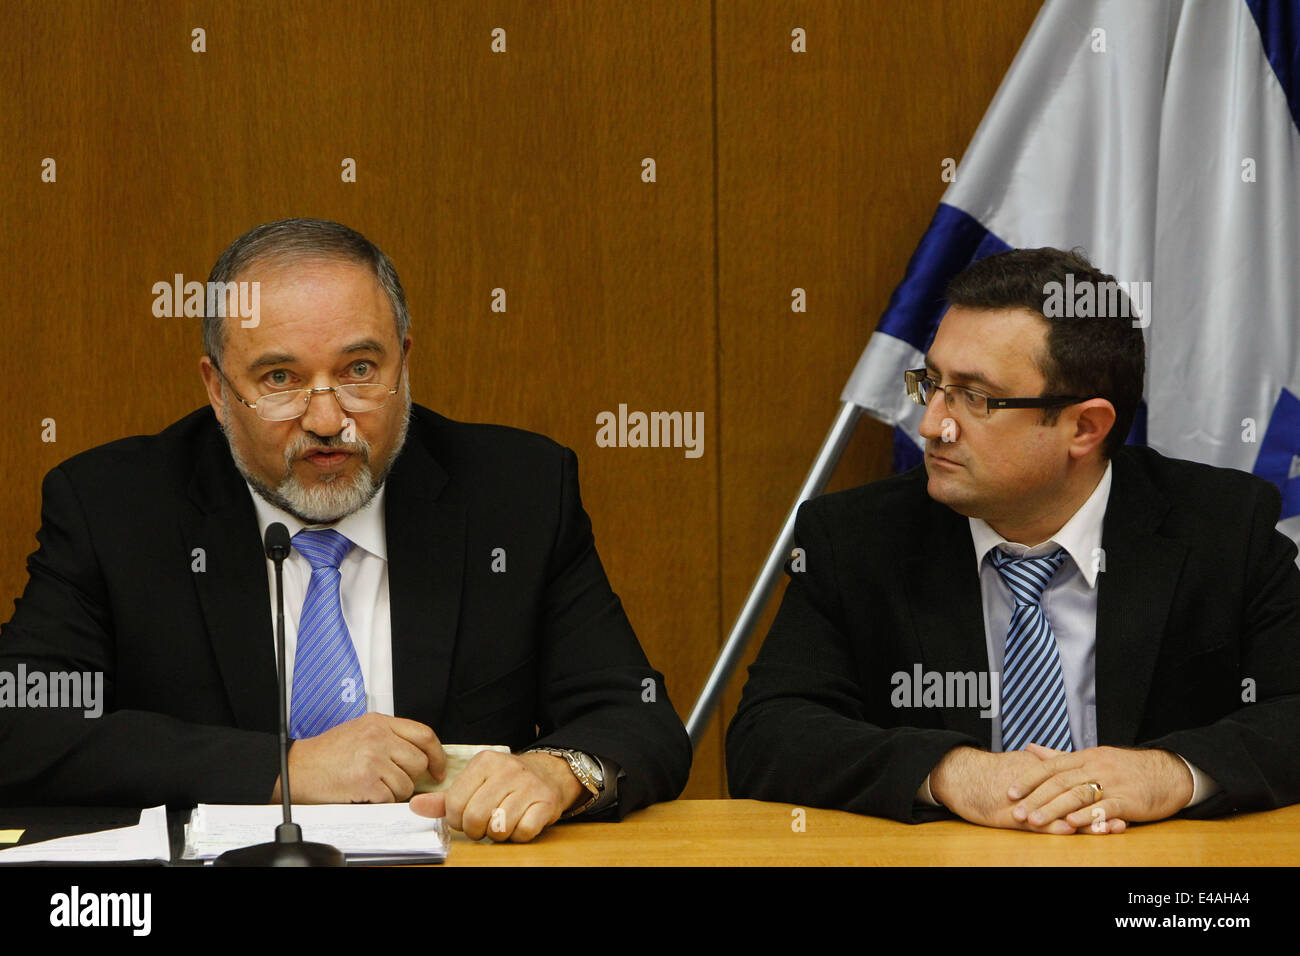 Jerusalem, Israel. 7th July, 2014. Israeli Foreign Minister Avigdor Lieberman (L) attends a news conference at the Knesset (parliament) in Jerusalem, on July 7, 2014. Avigdor Lieberman announced on Monday he decided to sever the joint faction he established with Prime Minister Benjamin Netanyahu due to 'fundamental disagreements.' Netanyahu and Lieberman have had disagreements over how Israel should respond to the recent outbreak of violence (among which the kidnap and murder of the three Israeli teens) and volleys of rockets from the Gaza Strip. Credit:  Xinhua/Alamy Live News Stock Photo